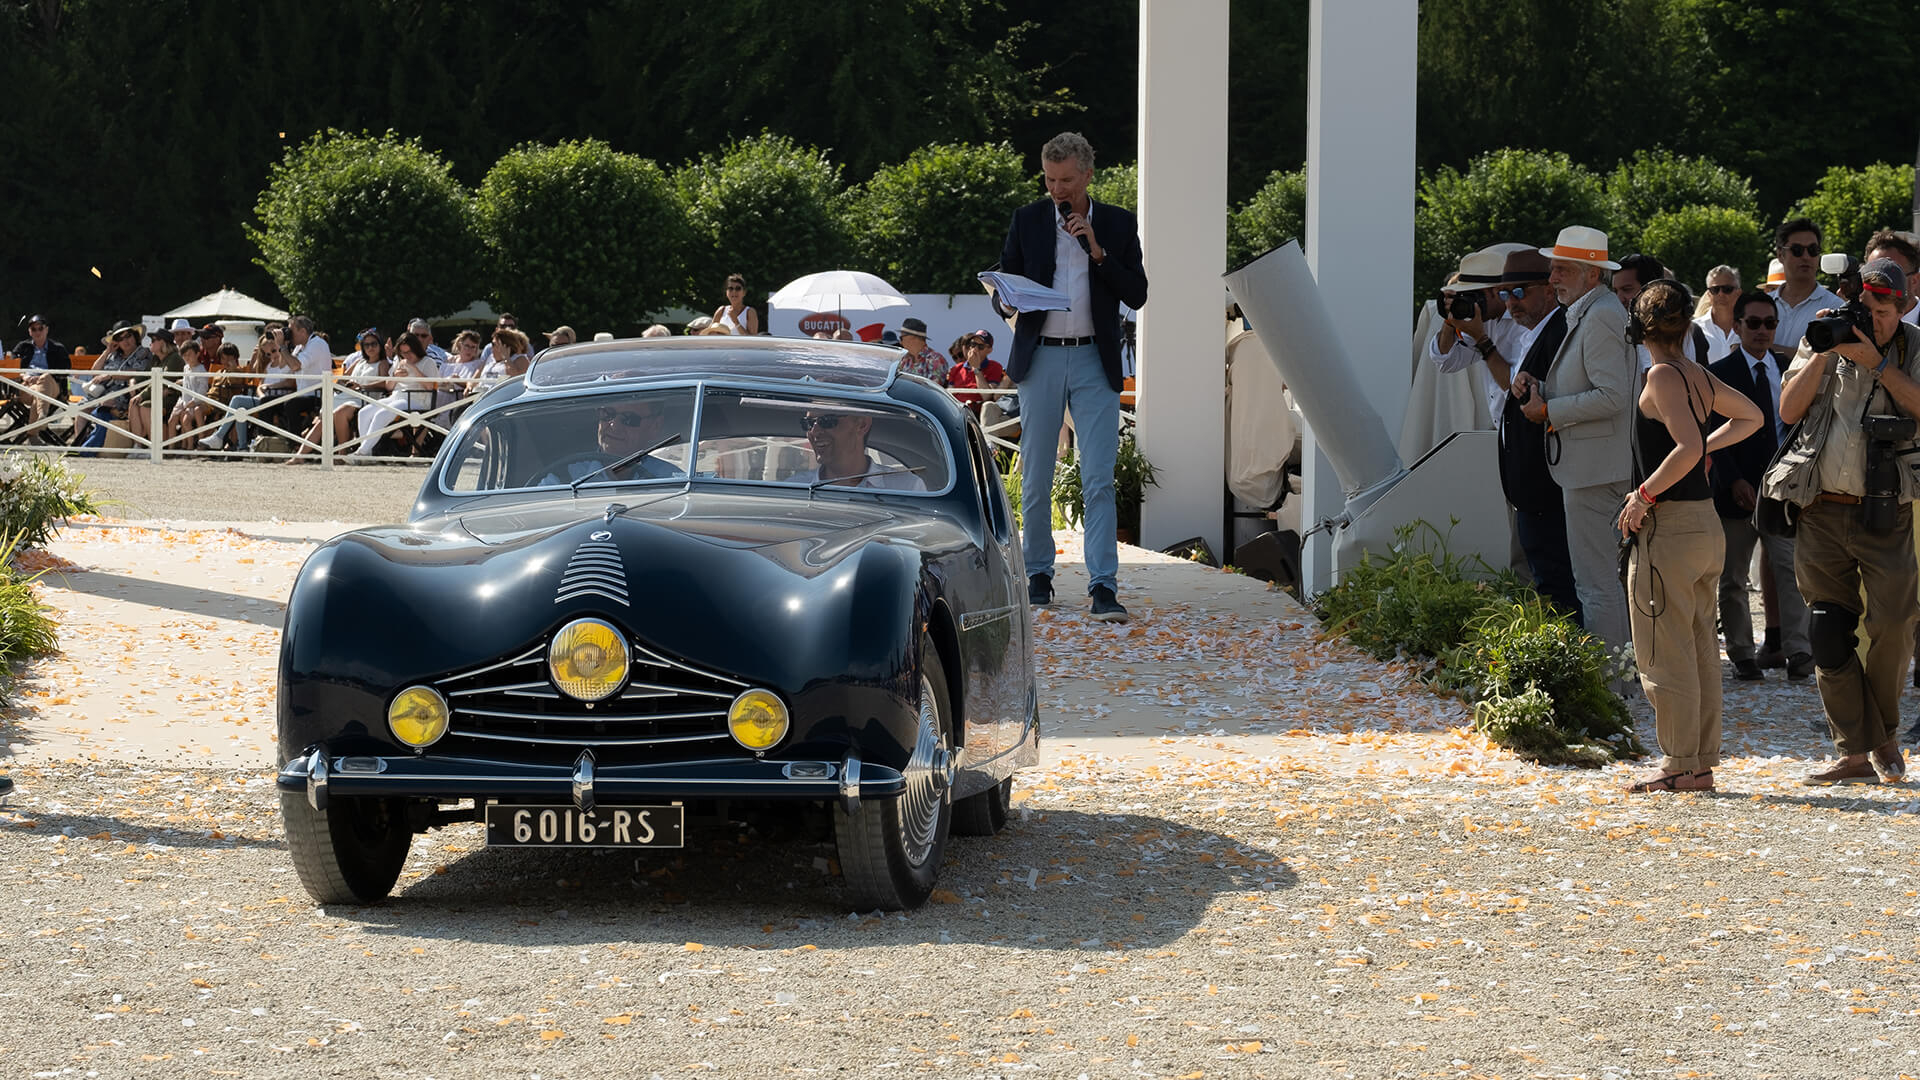 Duel in the sun: The 2019 Chantilly Arts & Elegance Richard Mille